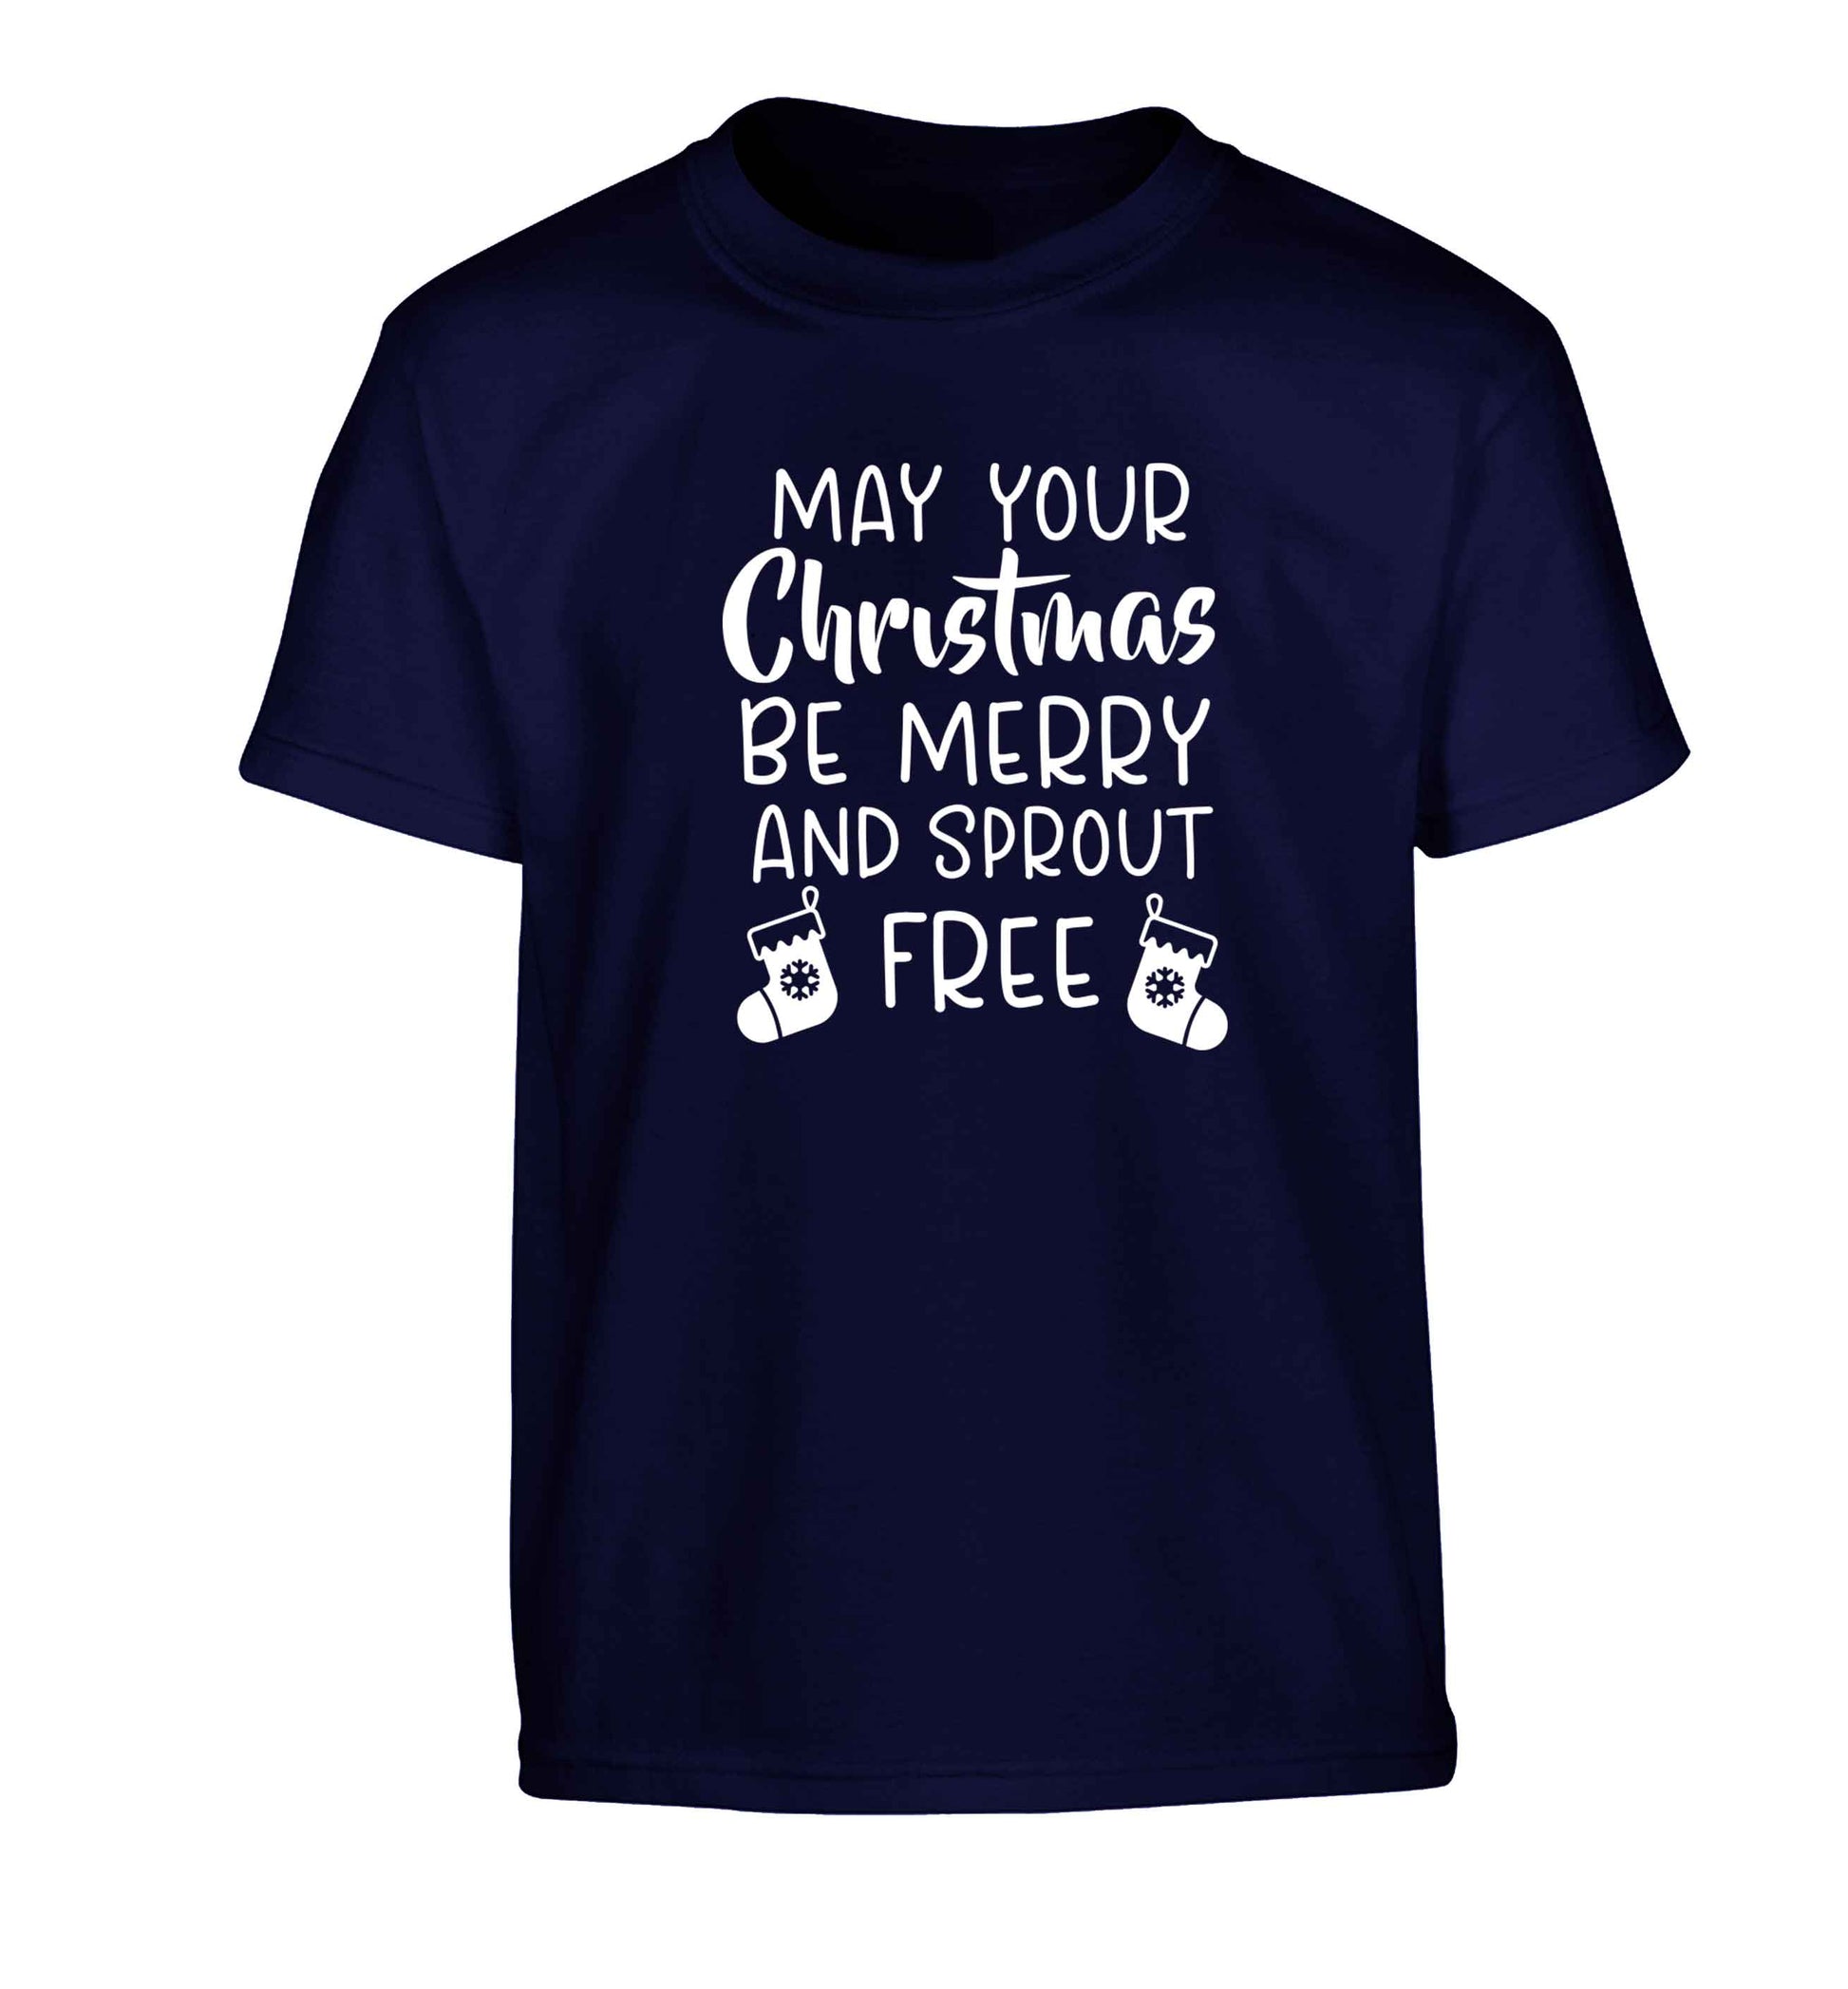 May your Christmas be merry and sprout free Children's navy Tshirt 12-13 Years